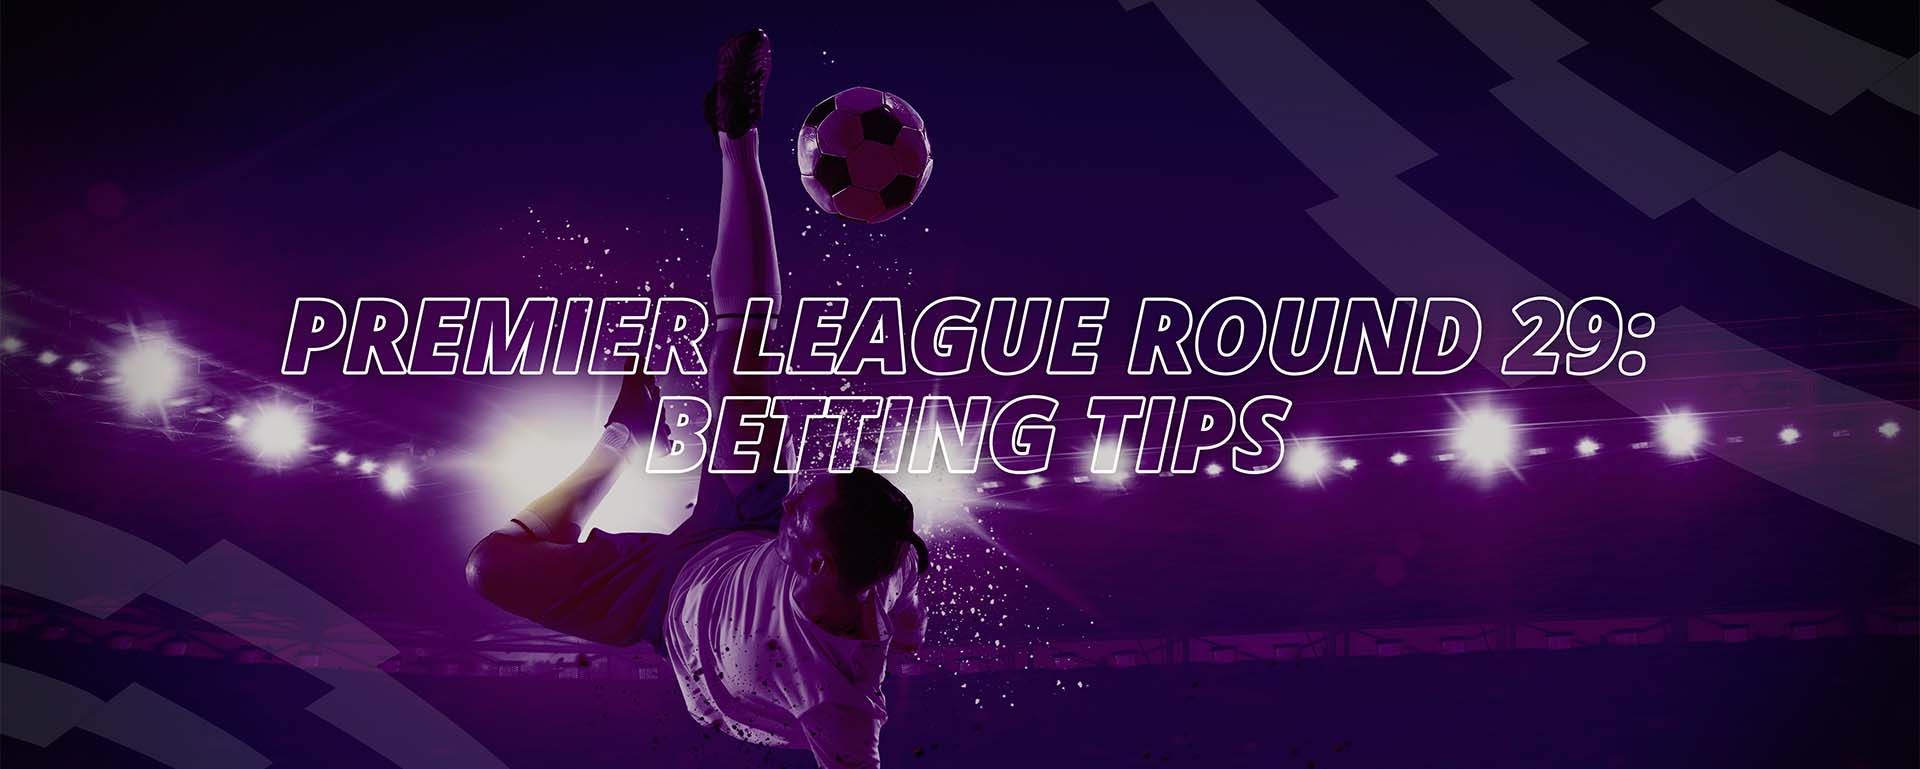 PREMIER LEAGUE ROUND 29: BETTING TIPS